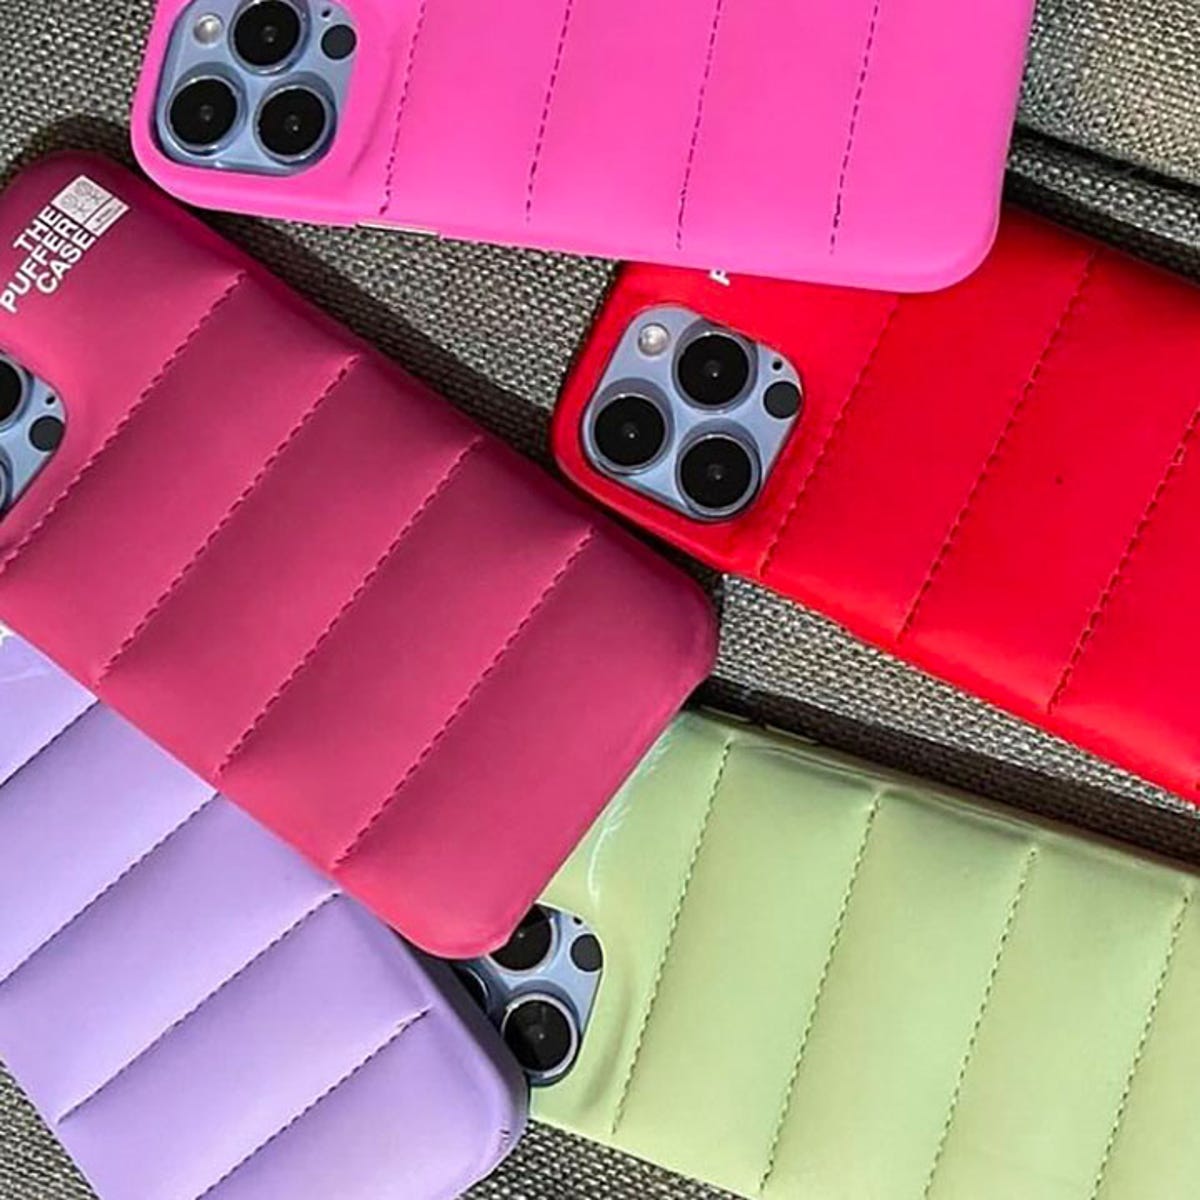 How To Choose Your Ideal Phone Case To Protect Your Smartphone? 